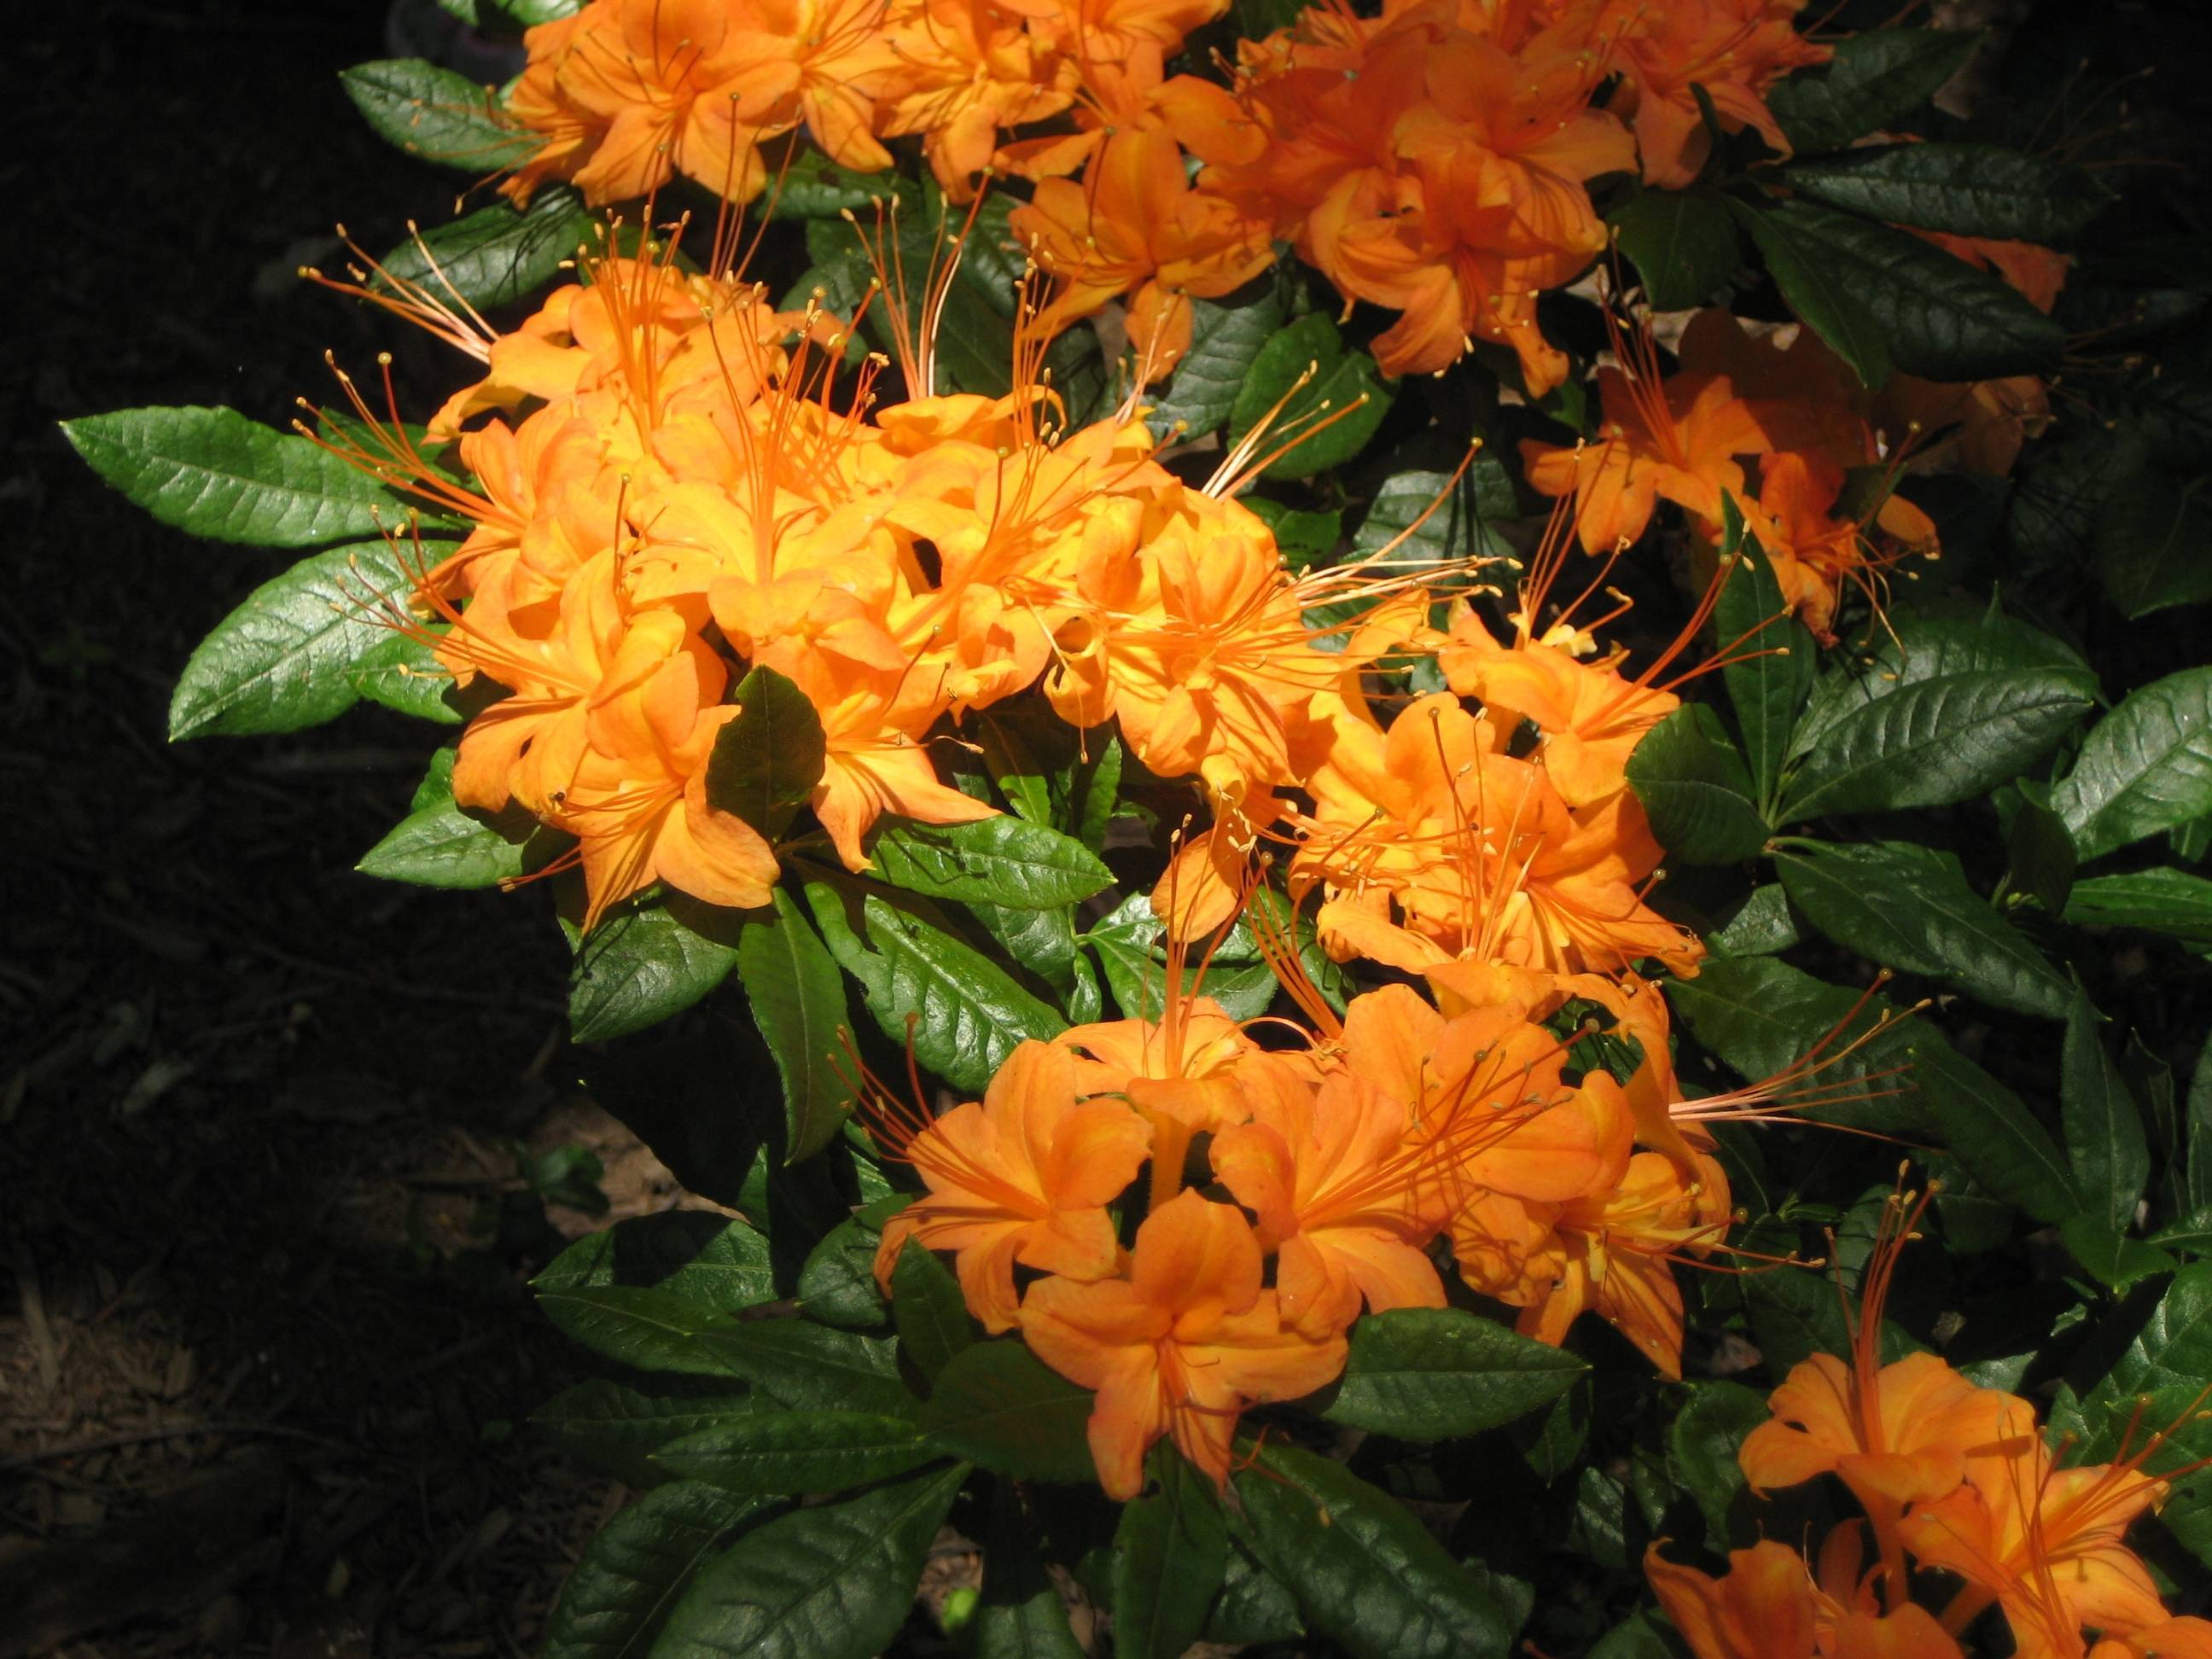 orange flowers with orange stamens and green leaves